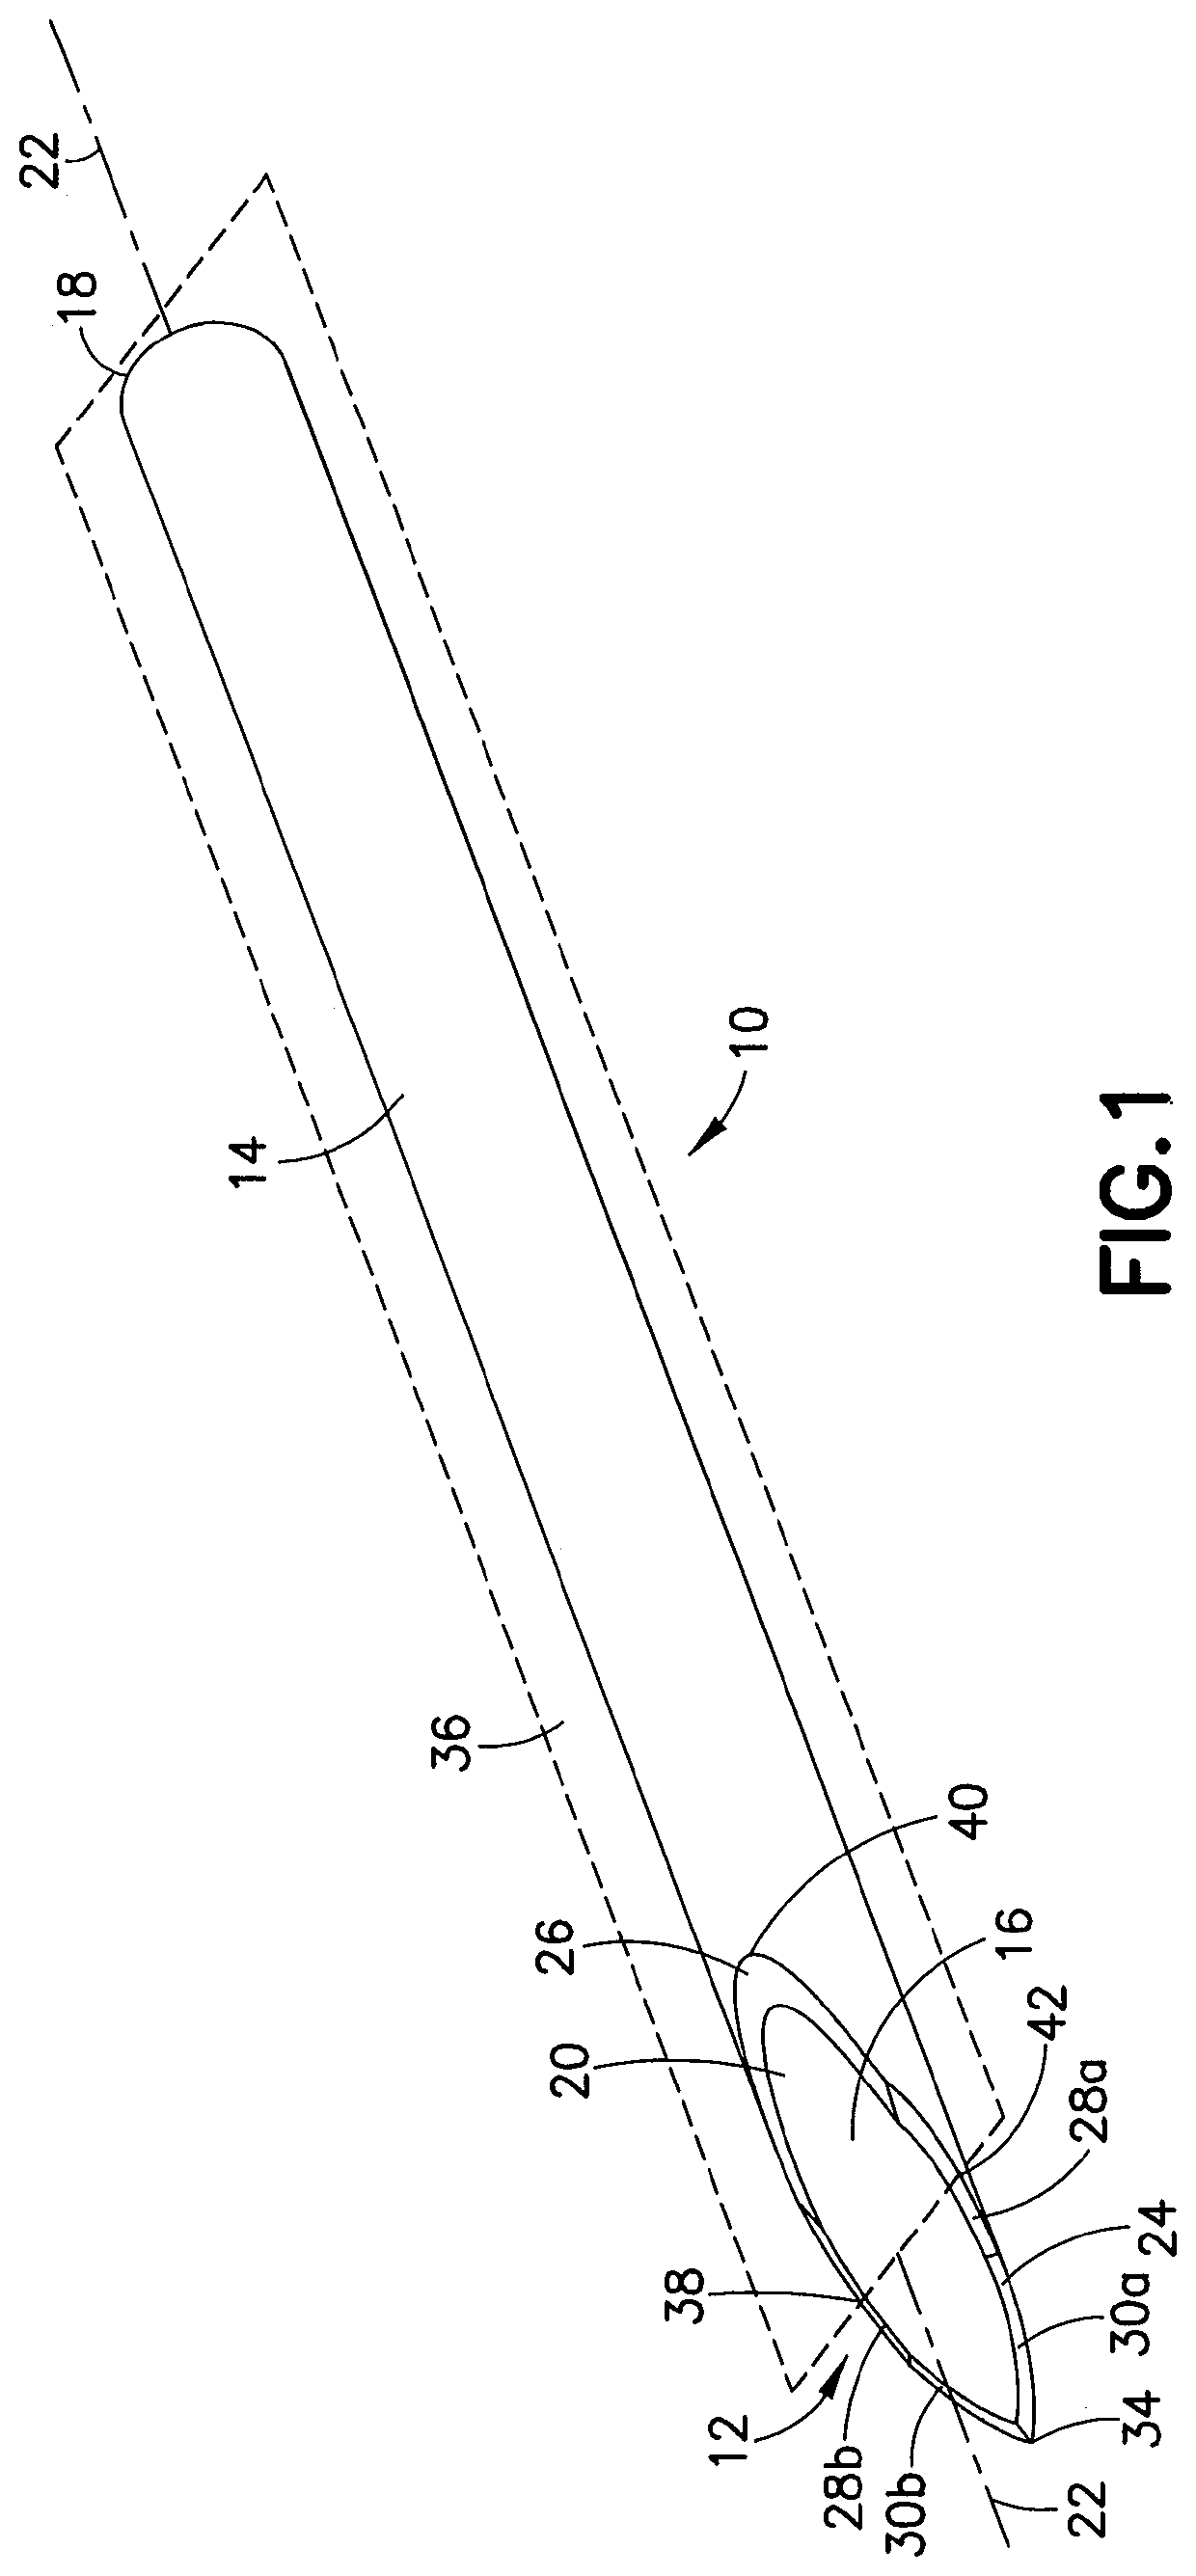 Five-bevel cannula for blood acquisition devices